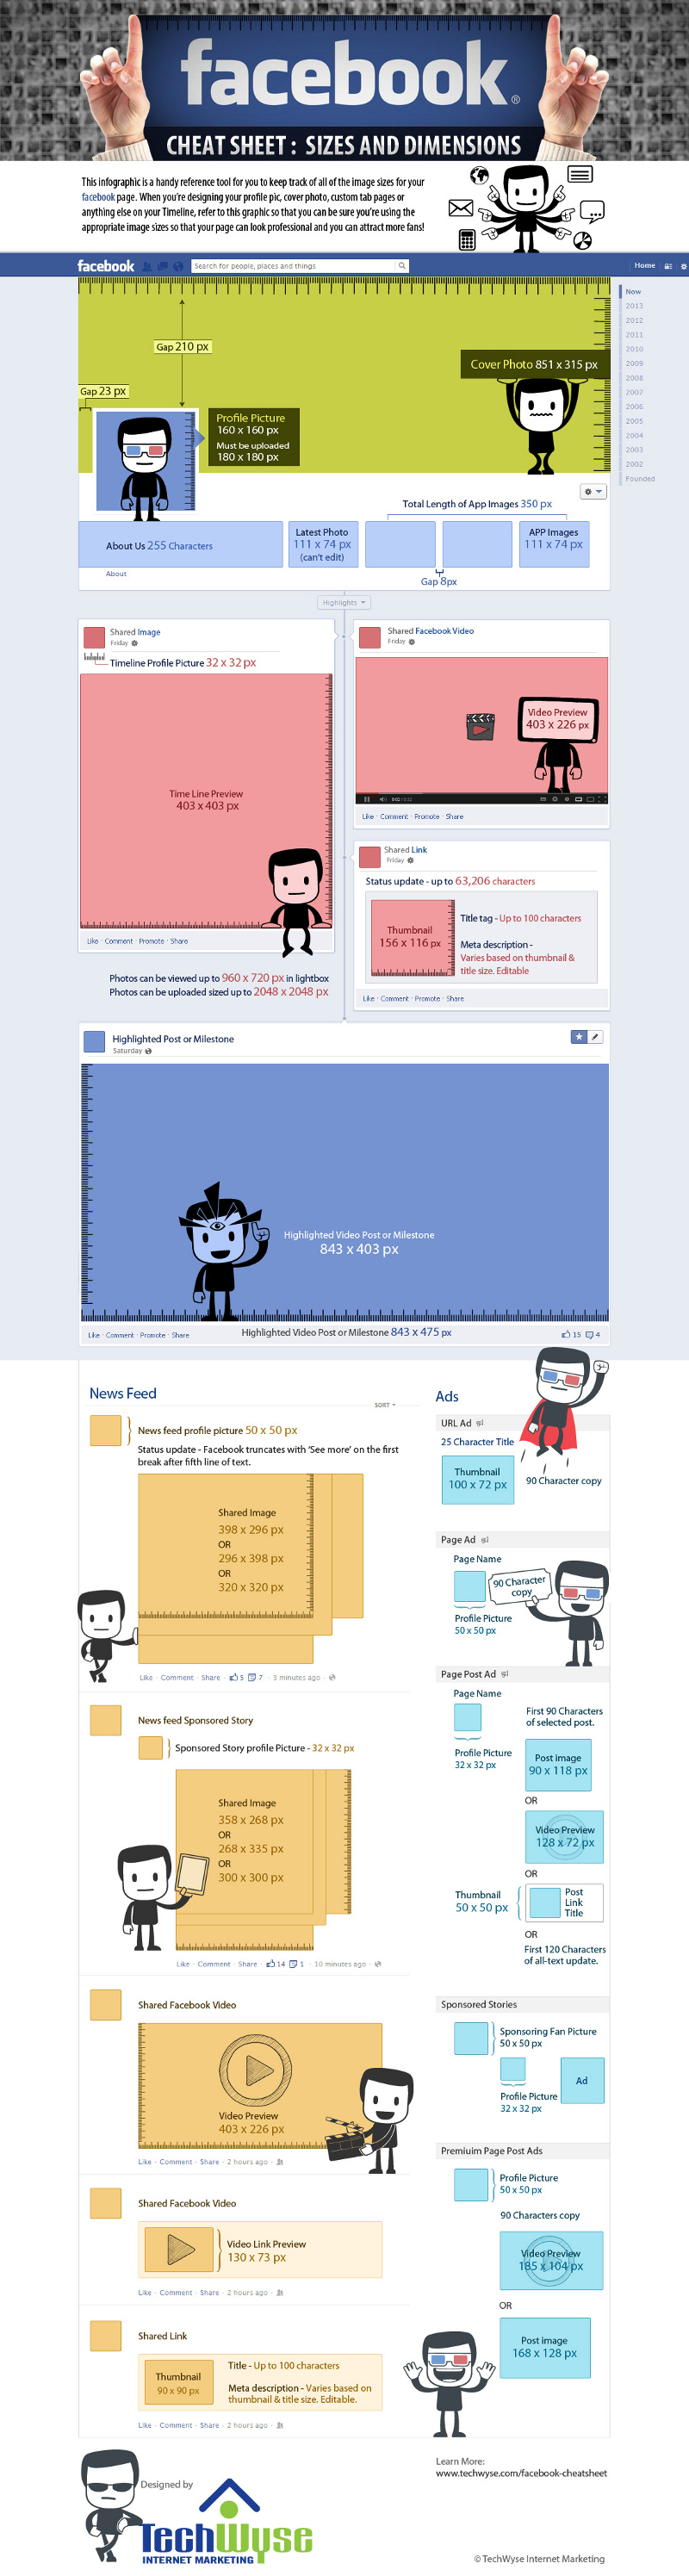 Facebook Image Sizes and Image Dimensions Cheat Sheet